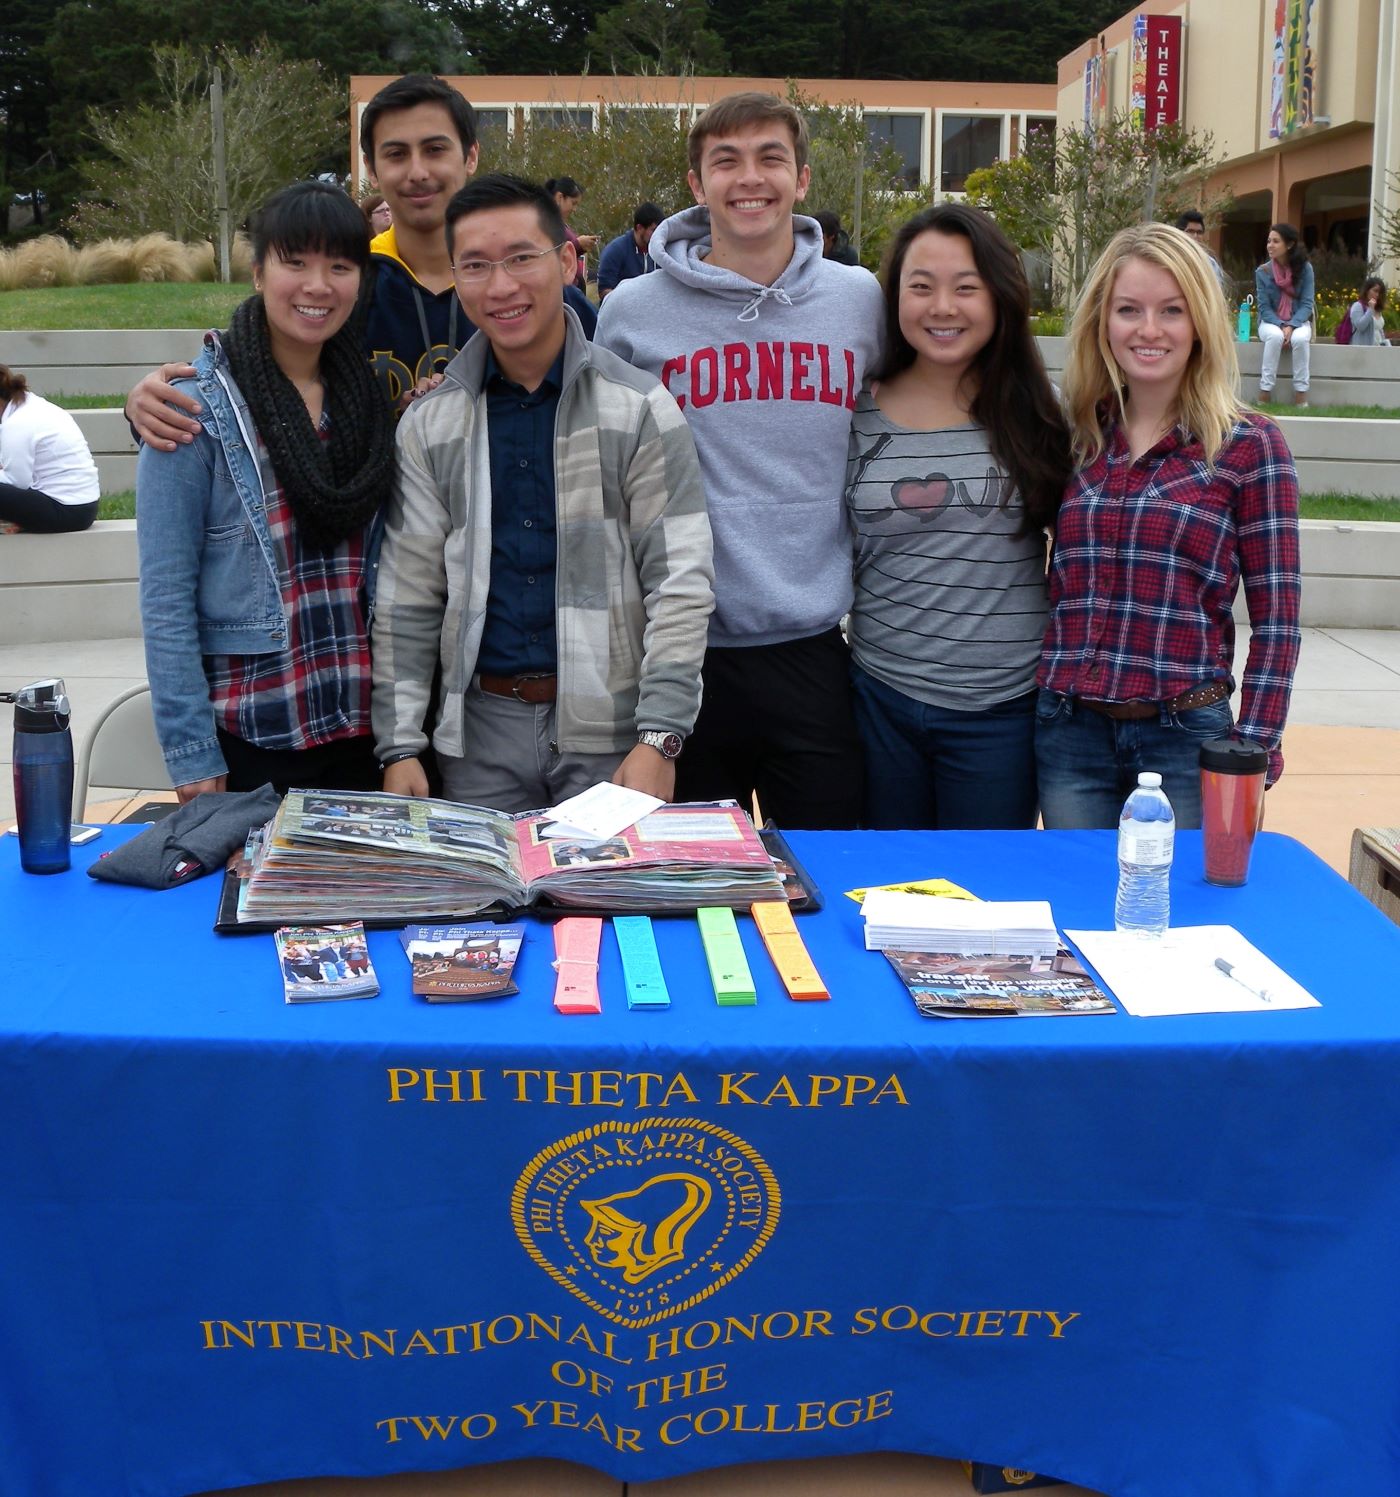 BOO students around a recruiting table in the quad